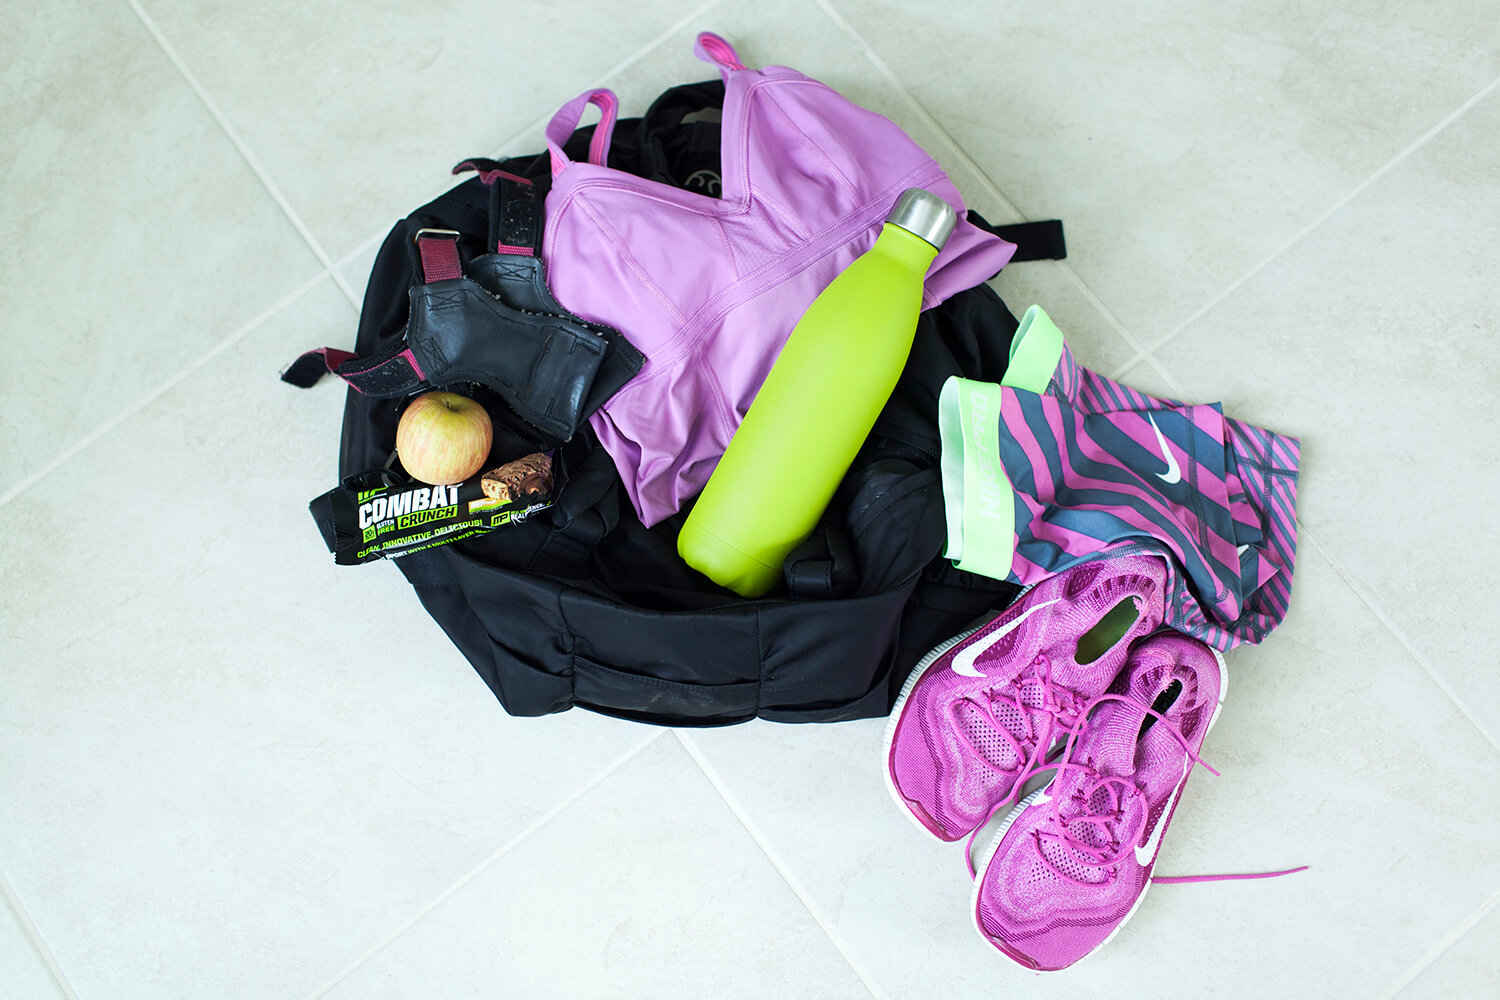 What's in My Gym Bag